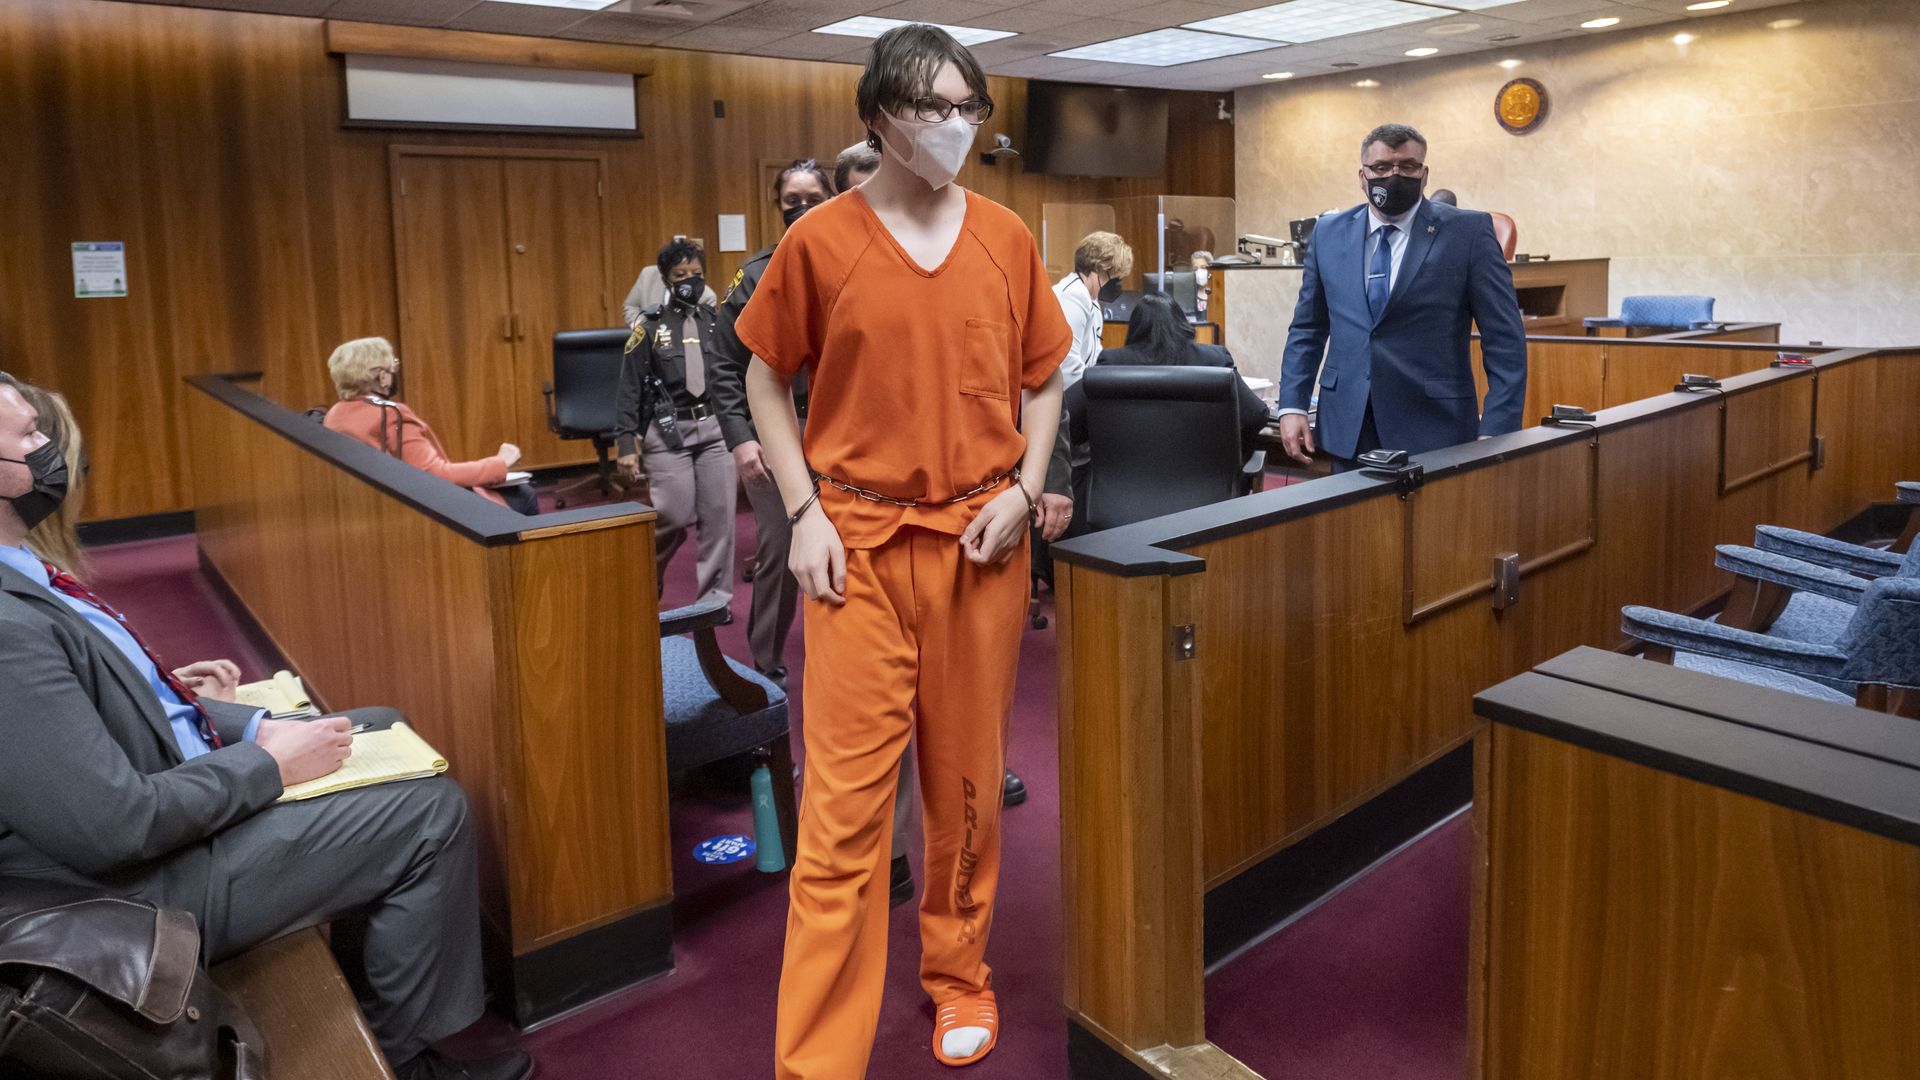 Ethan Crumbley is led away from the courtroom after a placement hearing at Oakland County Circuit Court on February 22, 2022 in Pontiac, Michigan. 